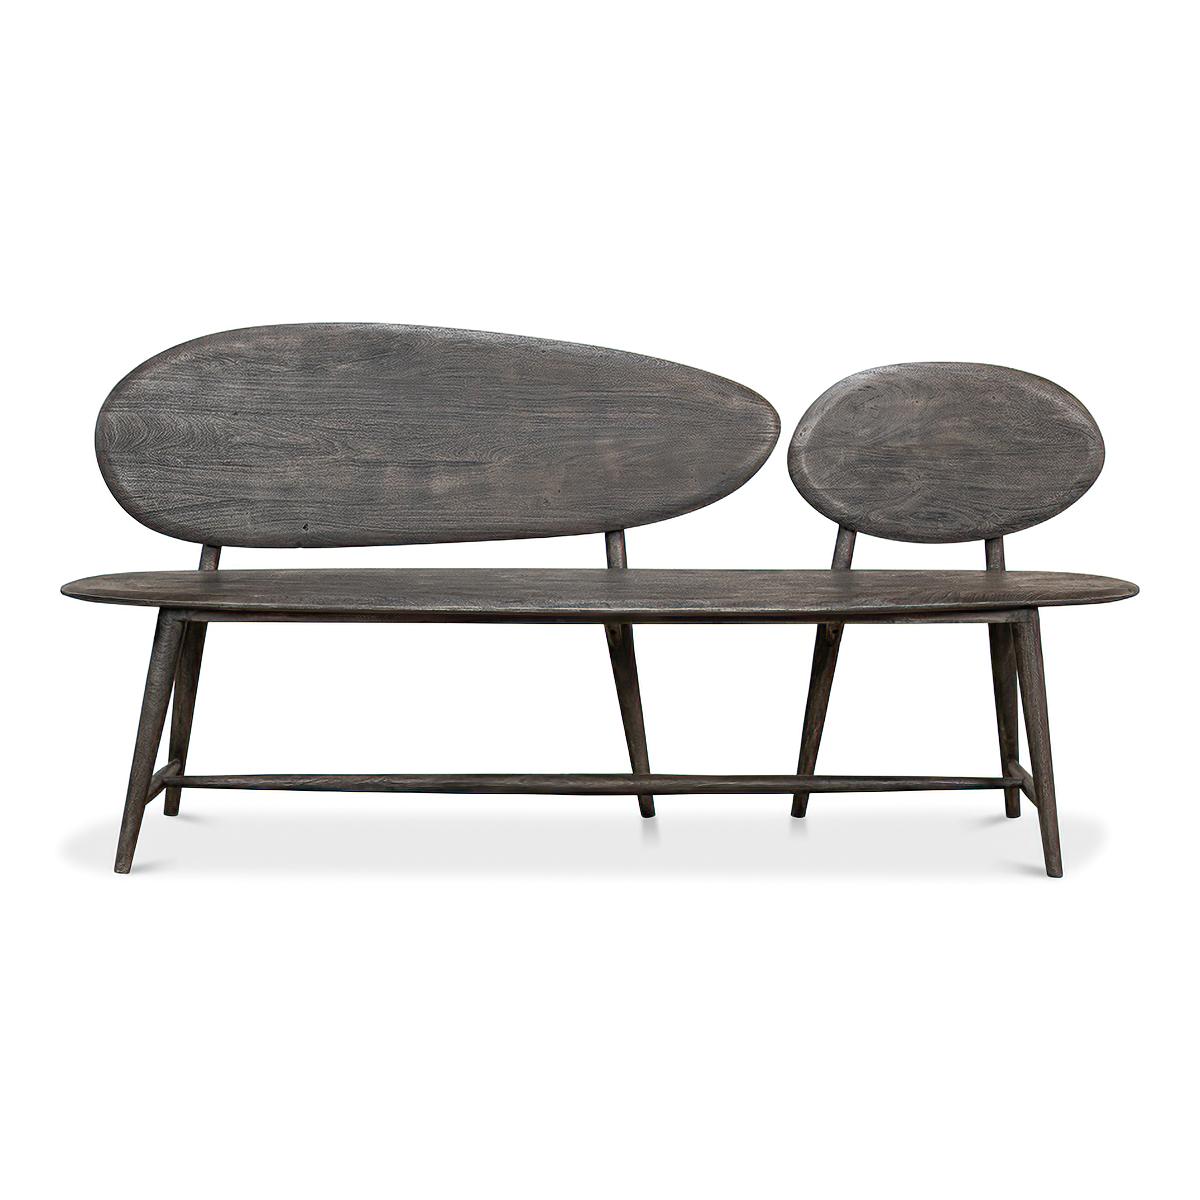 An organic modern greyed wood bench. This bench has a flair for the arts and is inspired by boulders and pebbles found in natural landscapes. It is hand-crafted and carved out of solid acacia and has a natural finish. Its unique abstract design